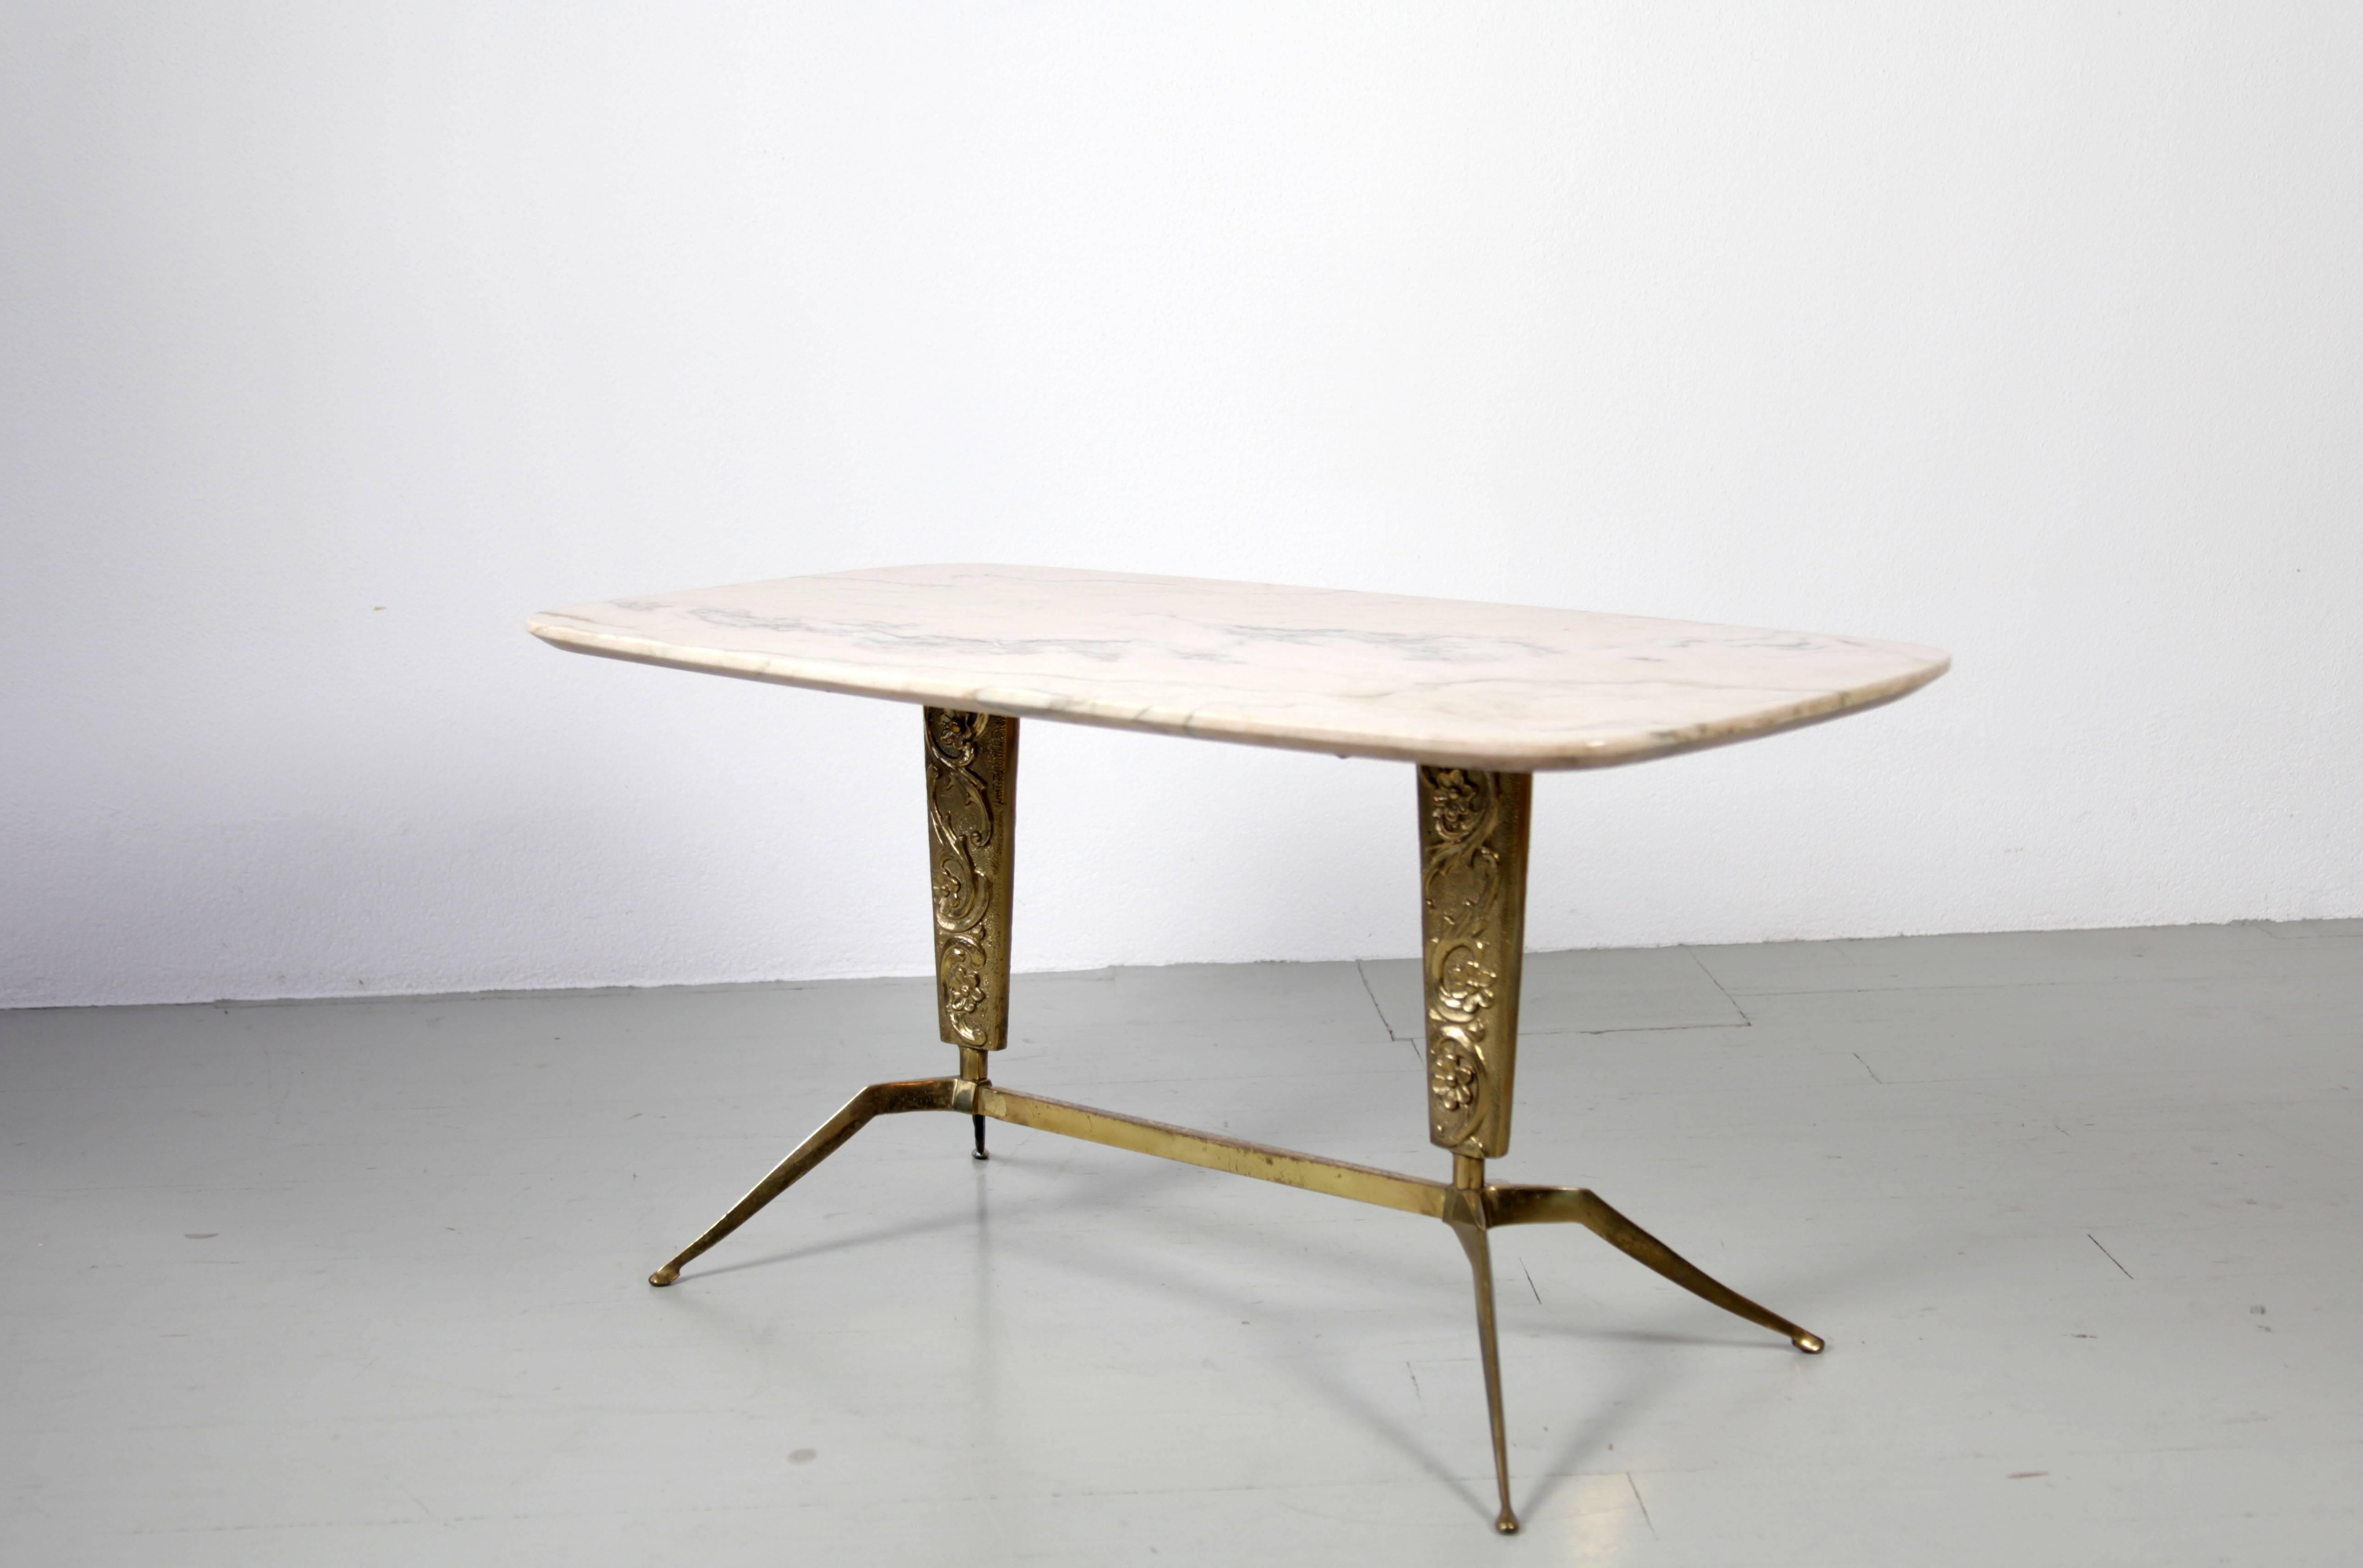 This side table was made in Italy in the 1950s. It has a brass frame with a garland motif and four delicate legs. A strong, apricot-coloured marble top rests on the table frame and rounds off the overall appearance of the table beautifully. It is in